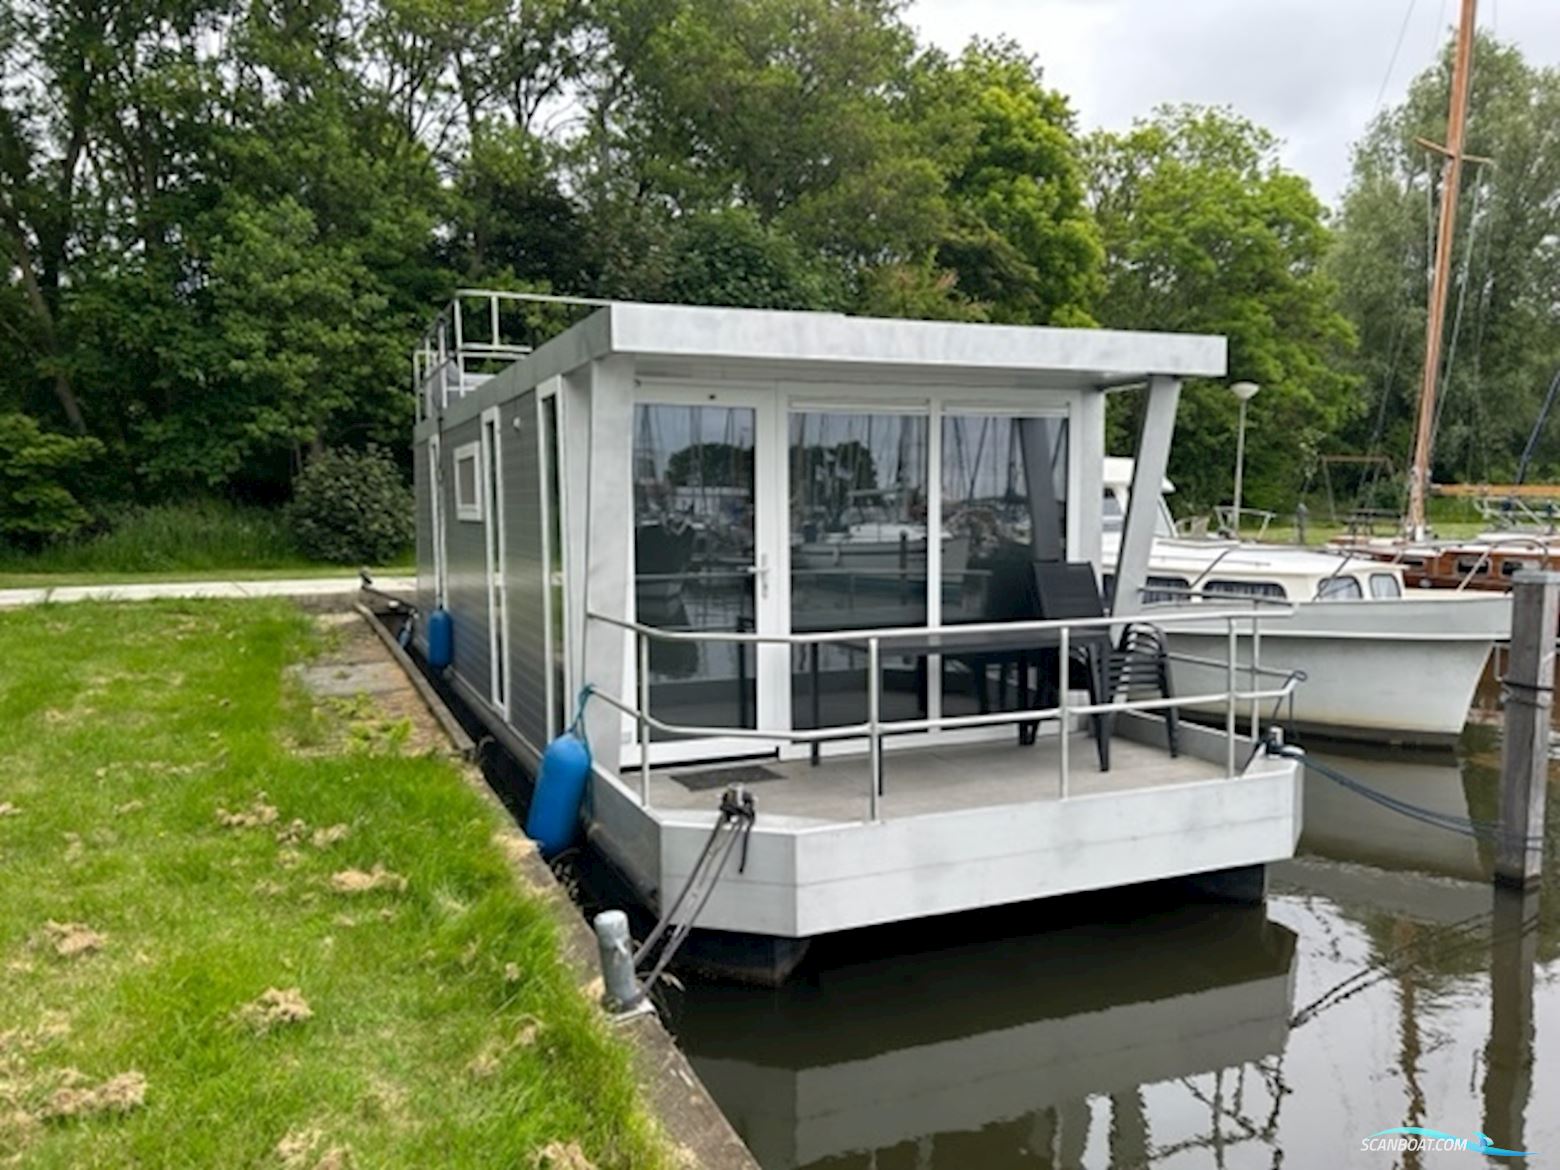 Havenlodge 1100 Live a board / River boat 2018, The Netherlands